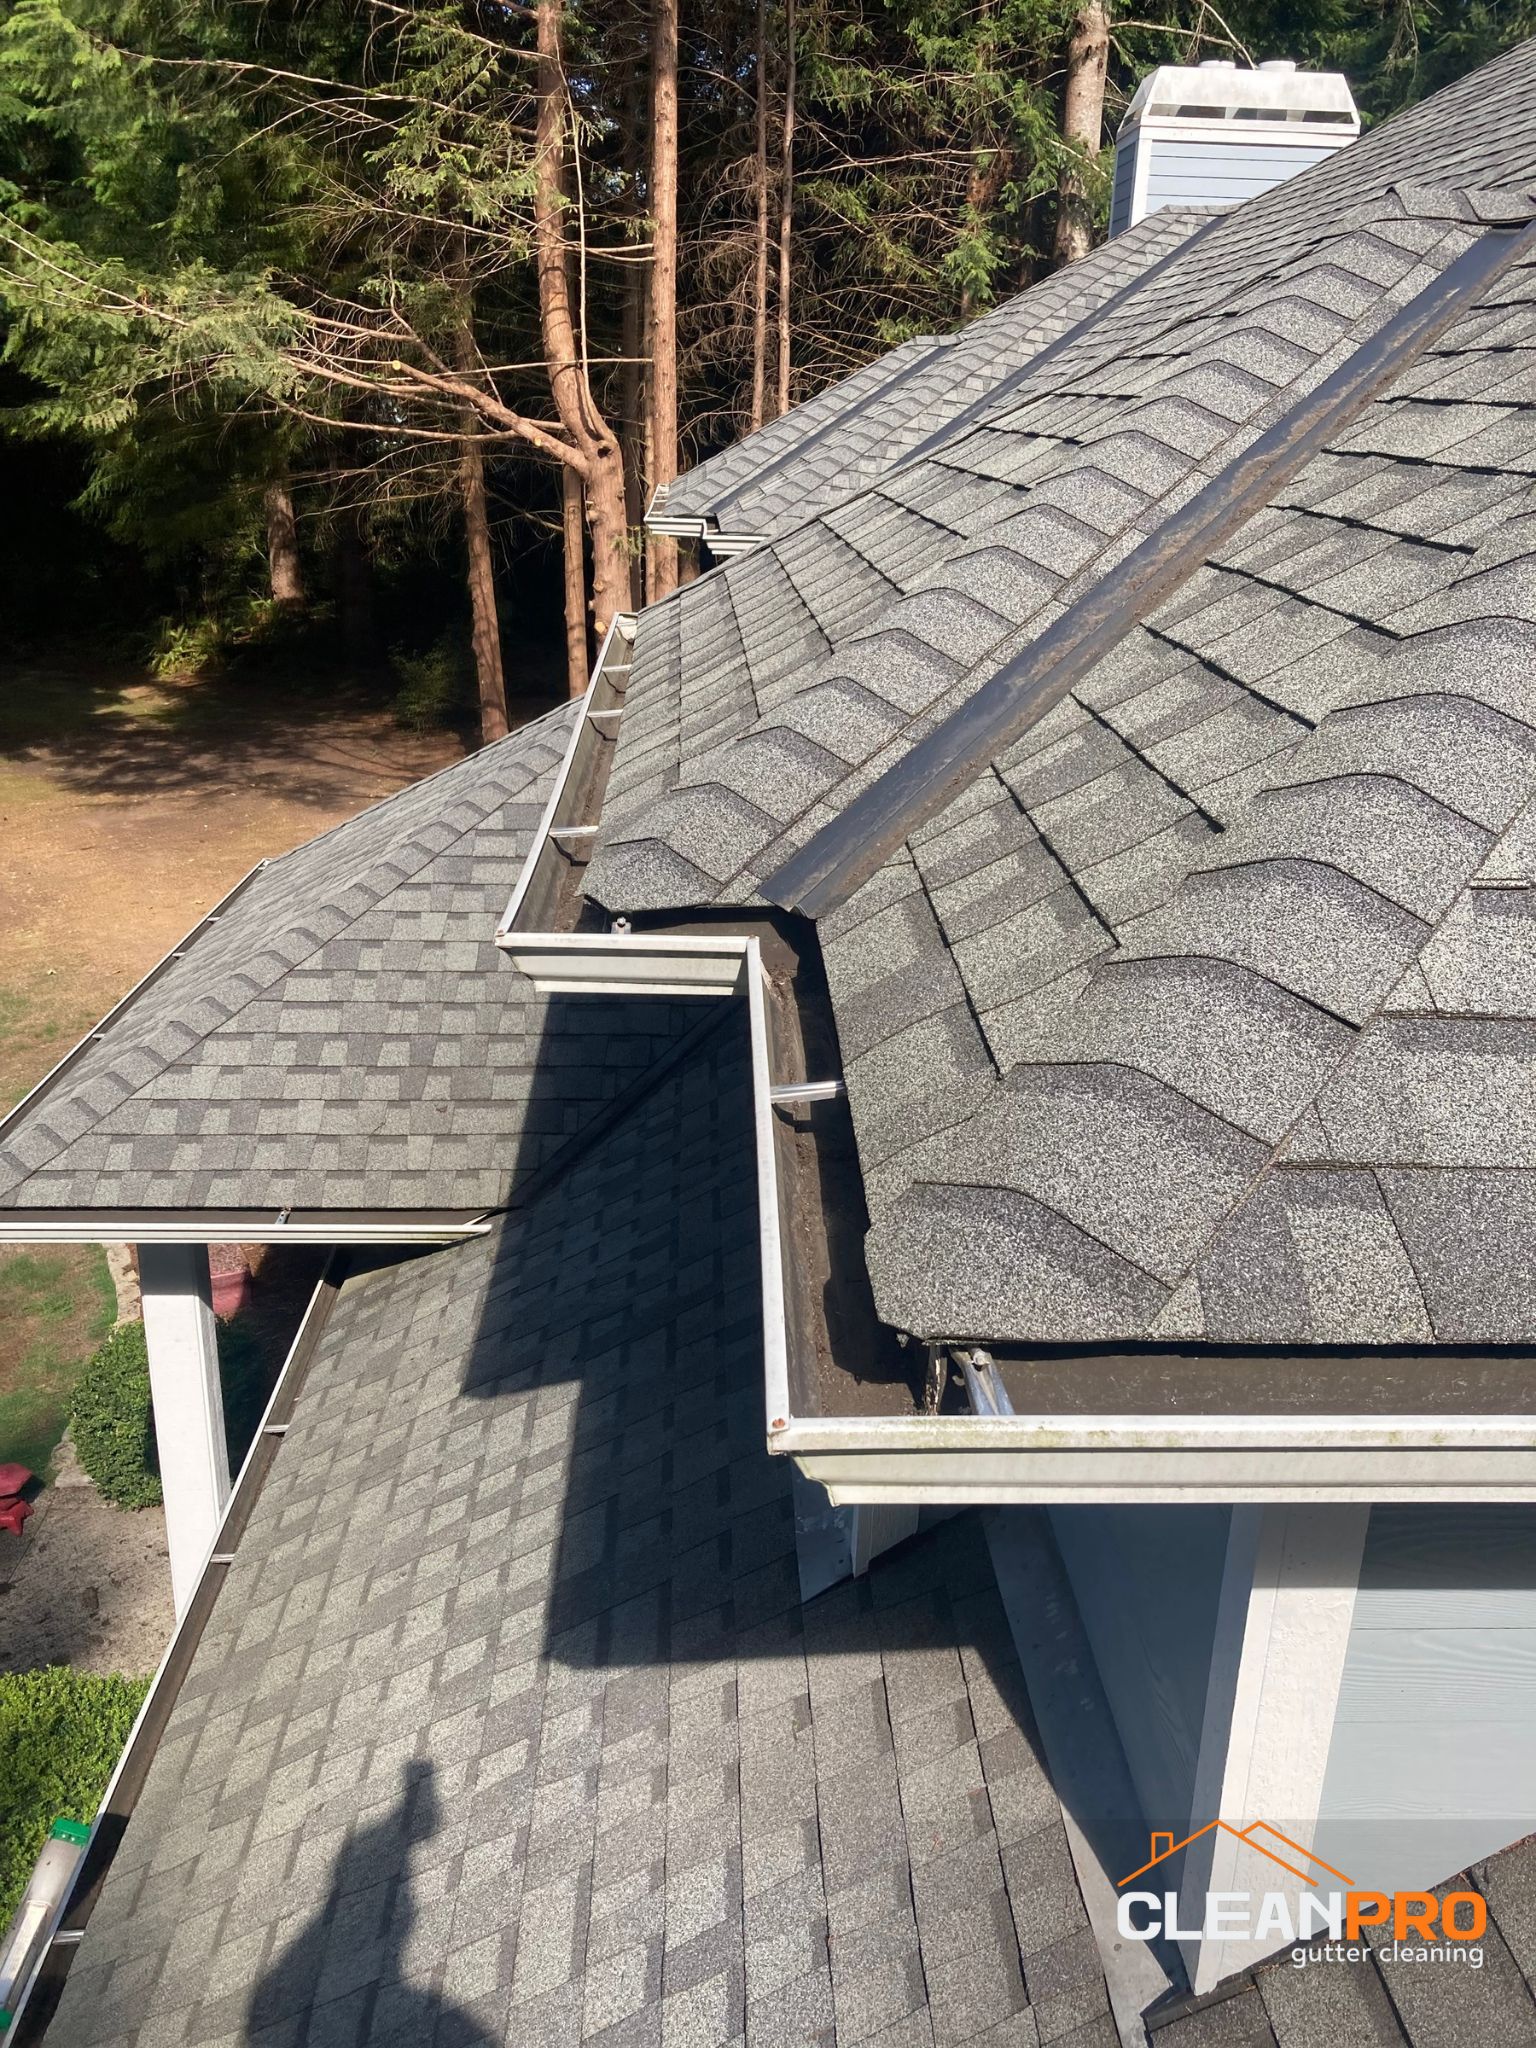 Top Notch Gutter Cleaning Service in Charlotte